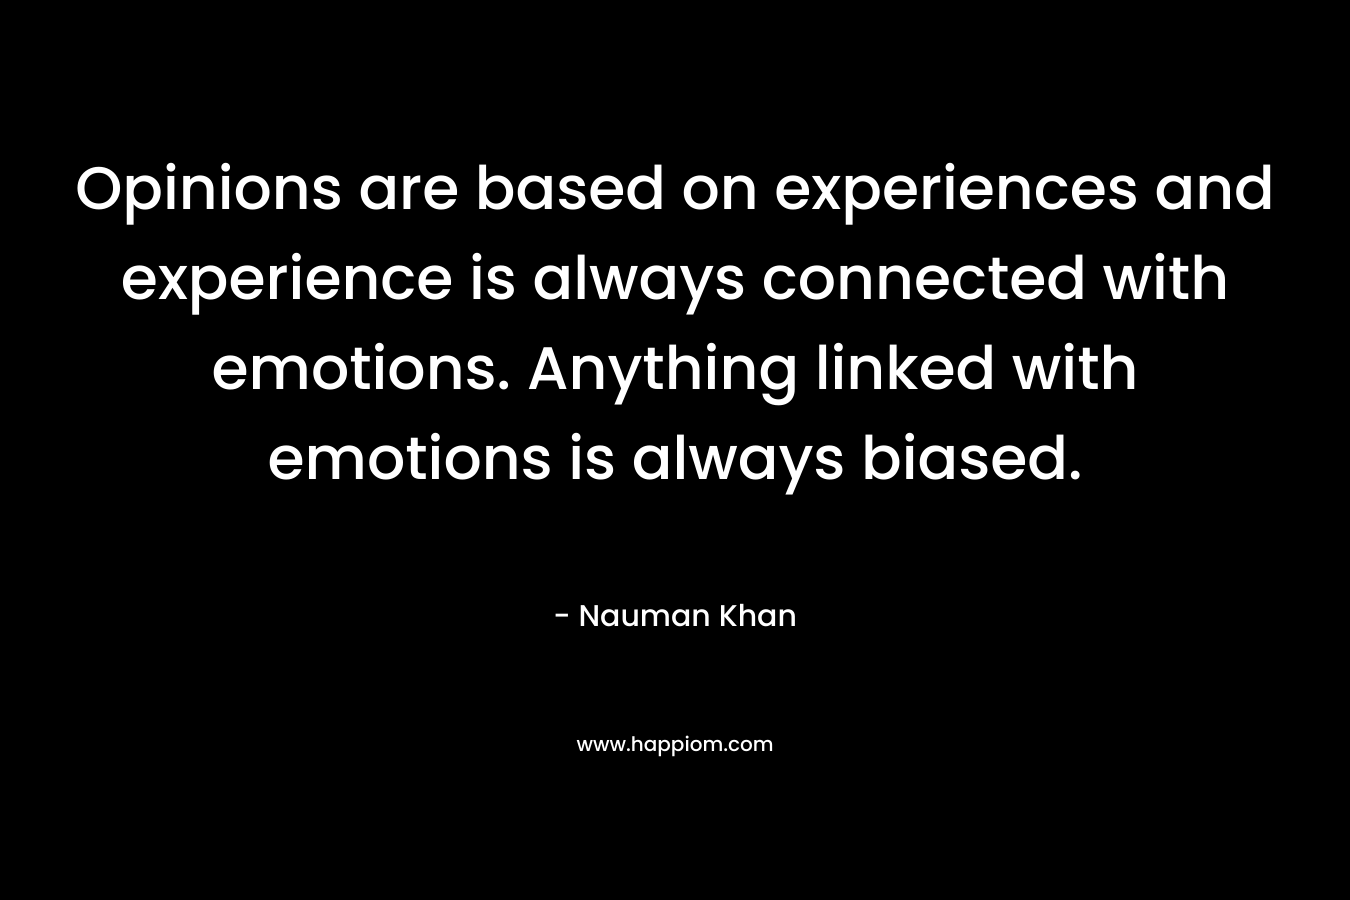 Opinions are based on experiences and experience is always connected with emotions. Anything linked with emotions is always biased. – Nauman Khan